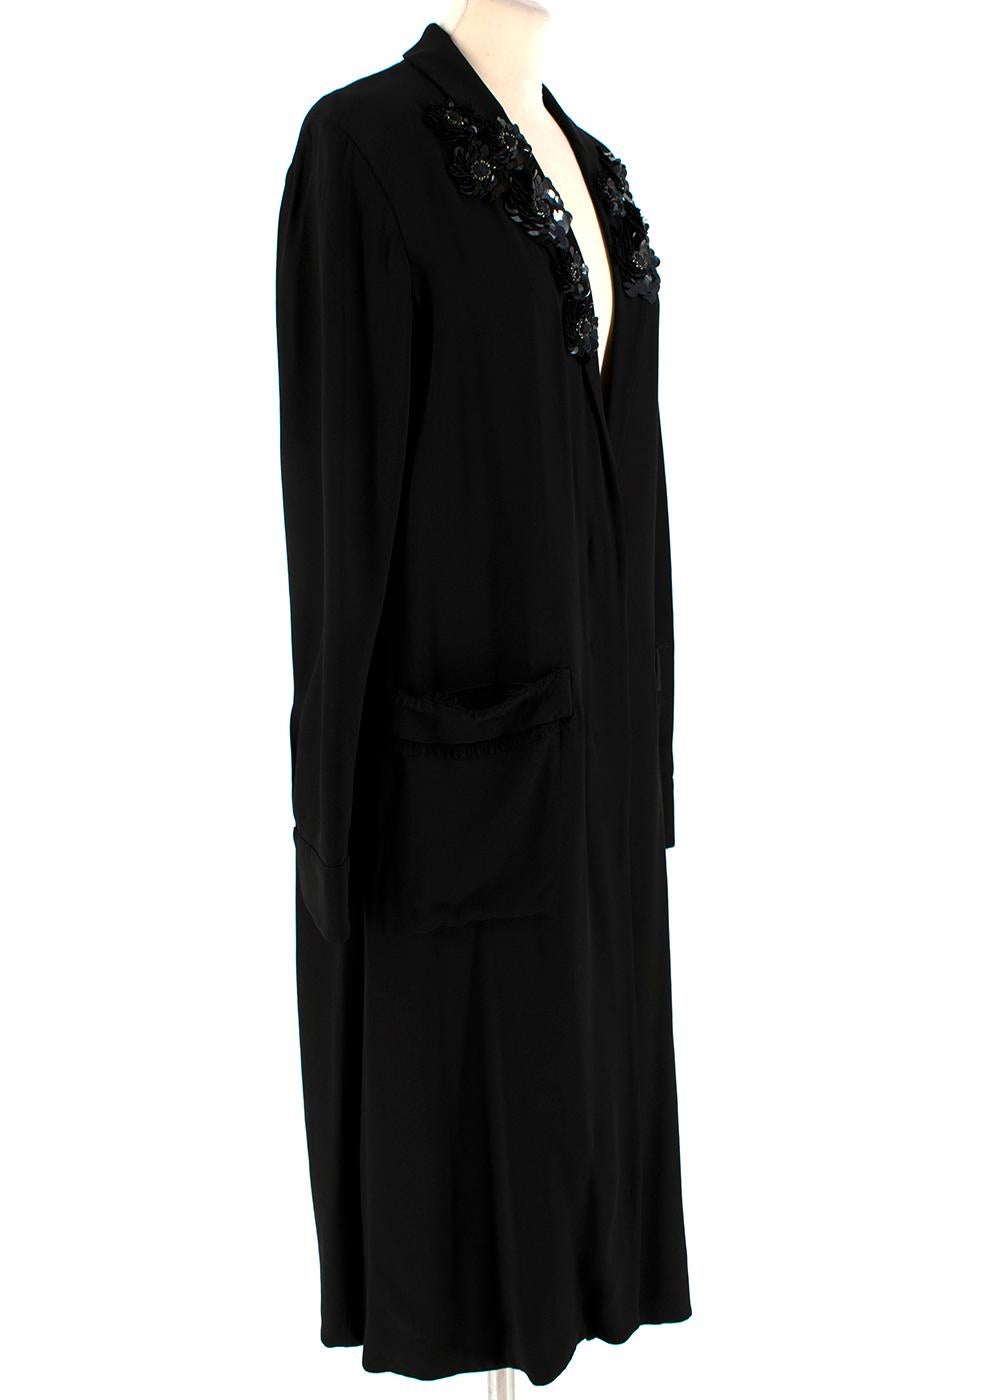 Marni Black Crepe Sequin Embellished Lightweight Coat

-Made of a soft lightweight crepe 
-Gorgeous flower like sequin embellishments to the shoulders 
-Classic elegant cut 
-Frayed details to the pockets 
-2 pockets to the front 
-Concealed button